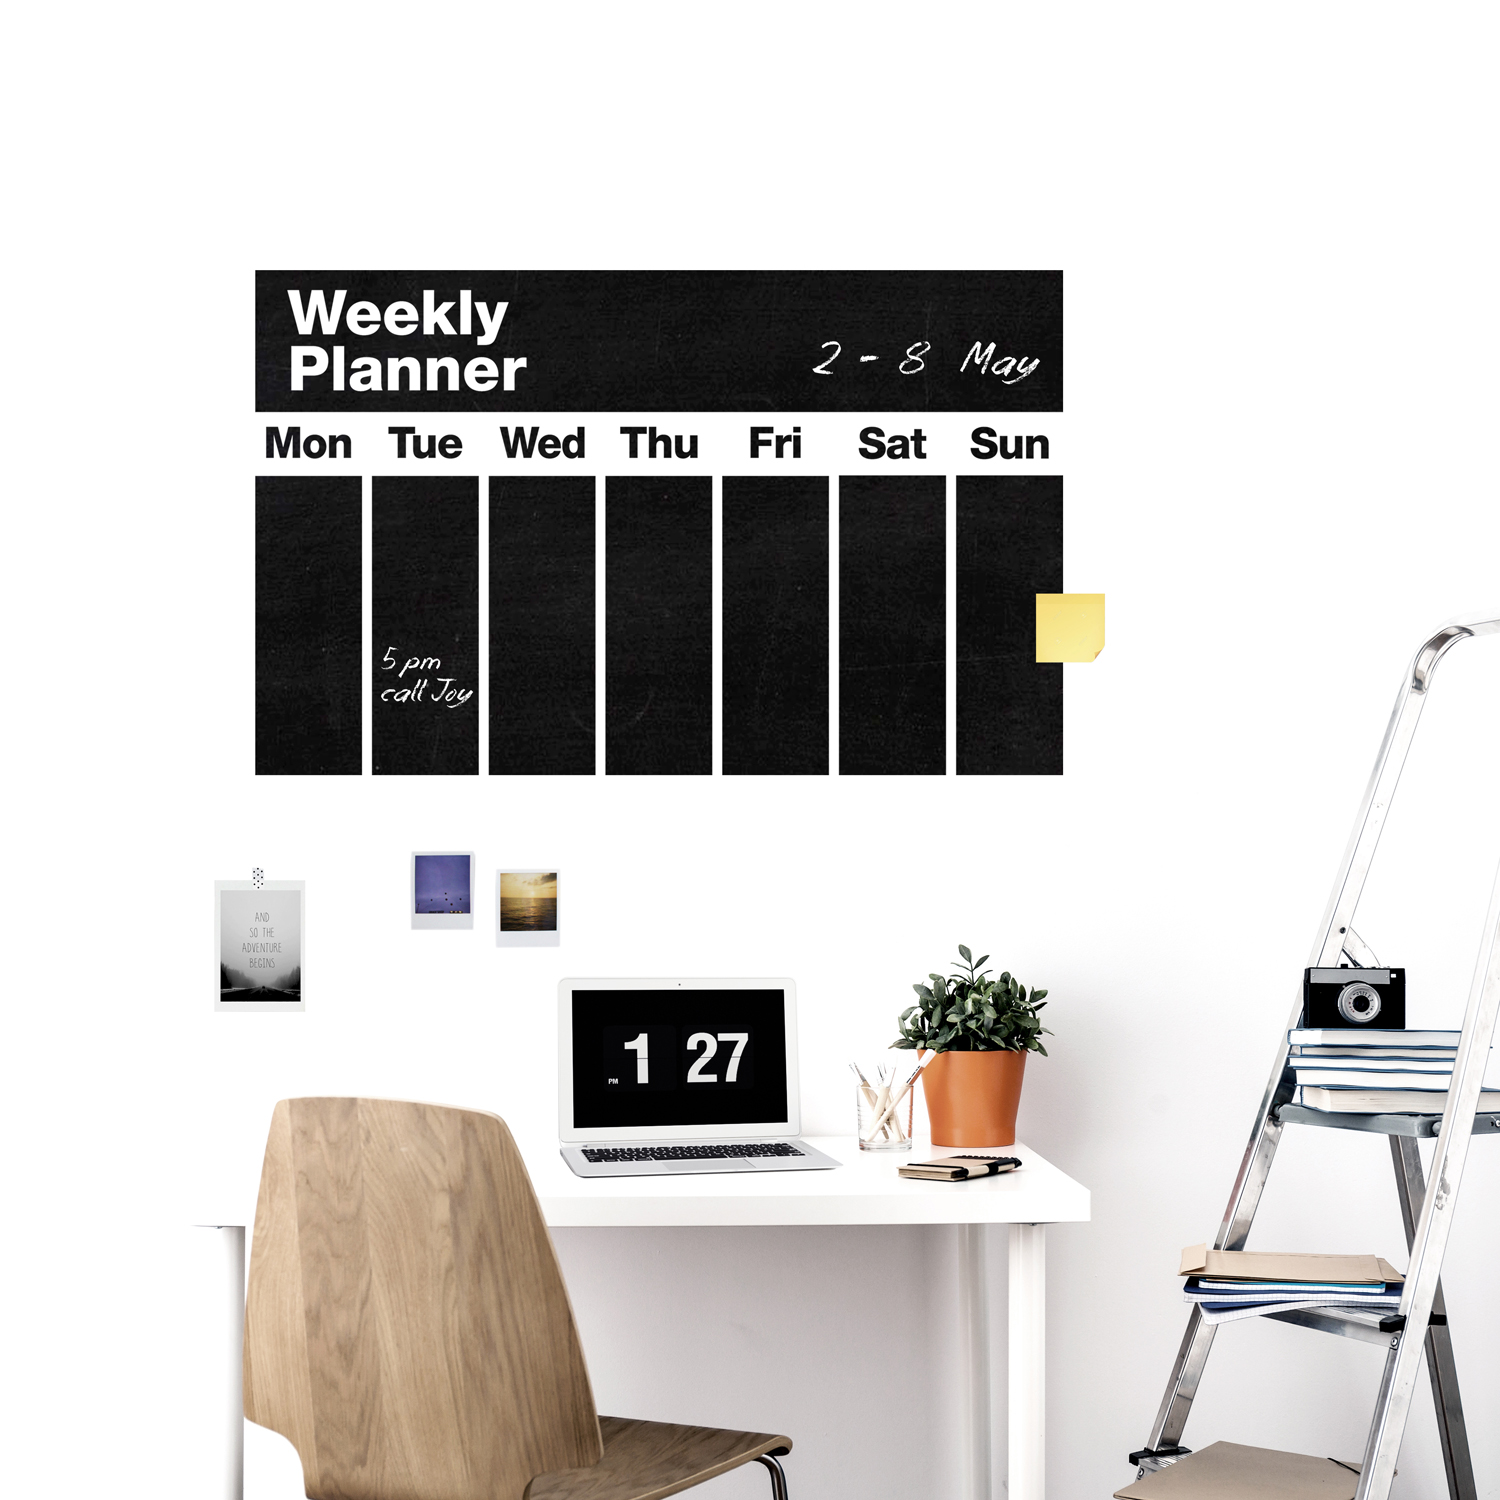 Lavagna adesiva – “Weekly Planner” – Oh!